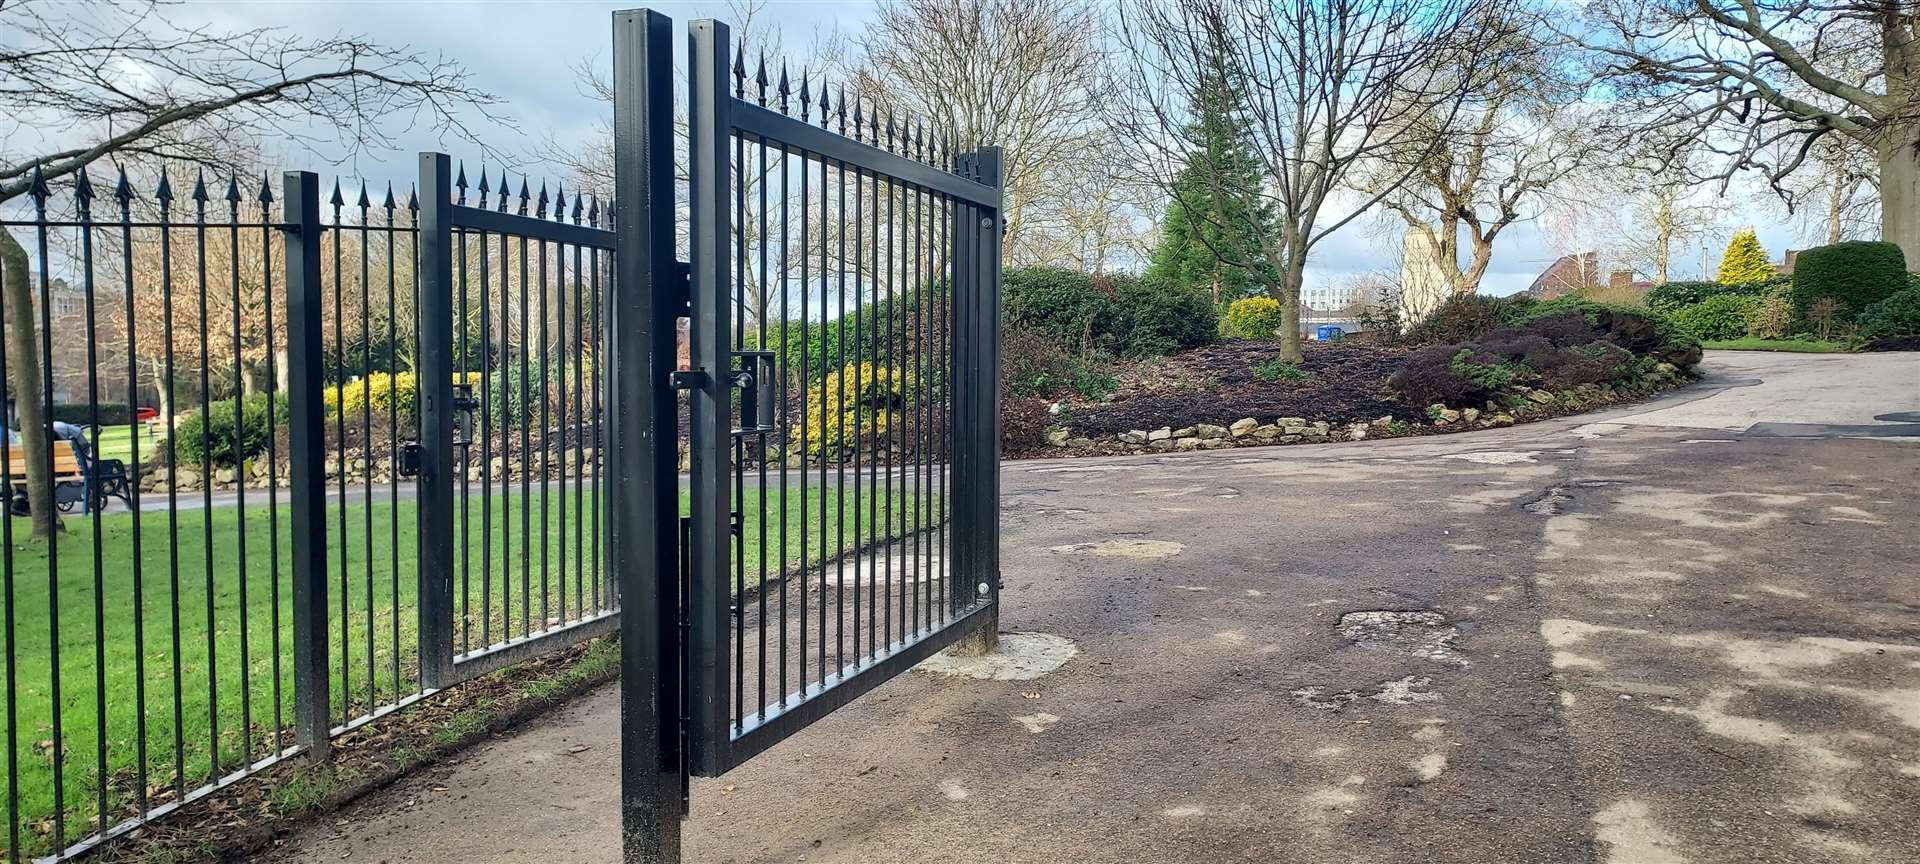 New gates have been installed at Brenchley Garden in Maidstone